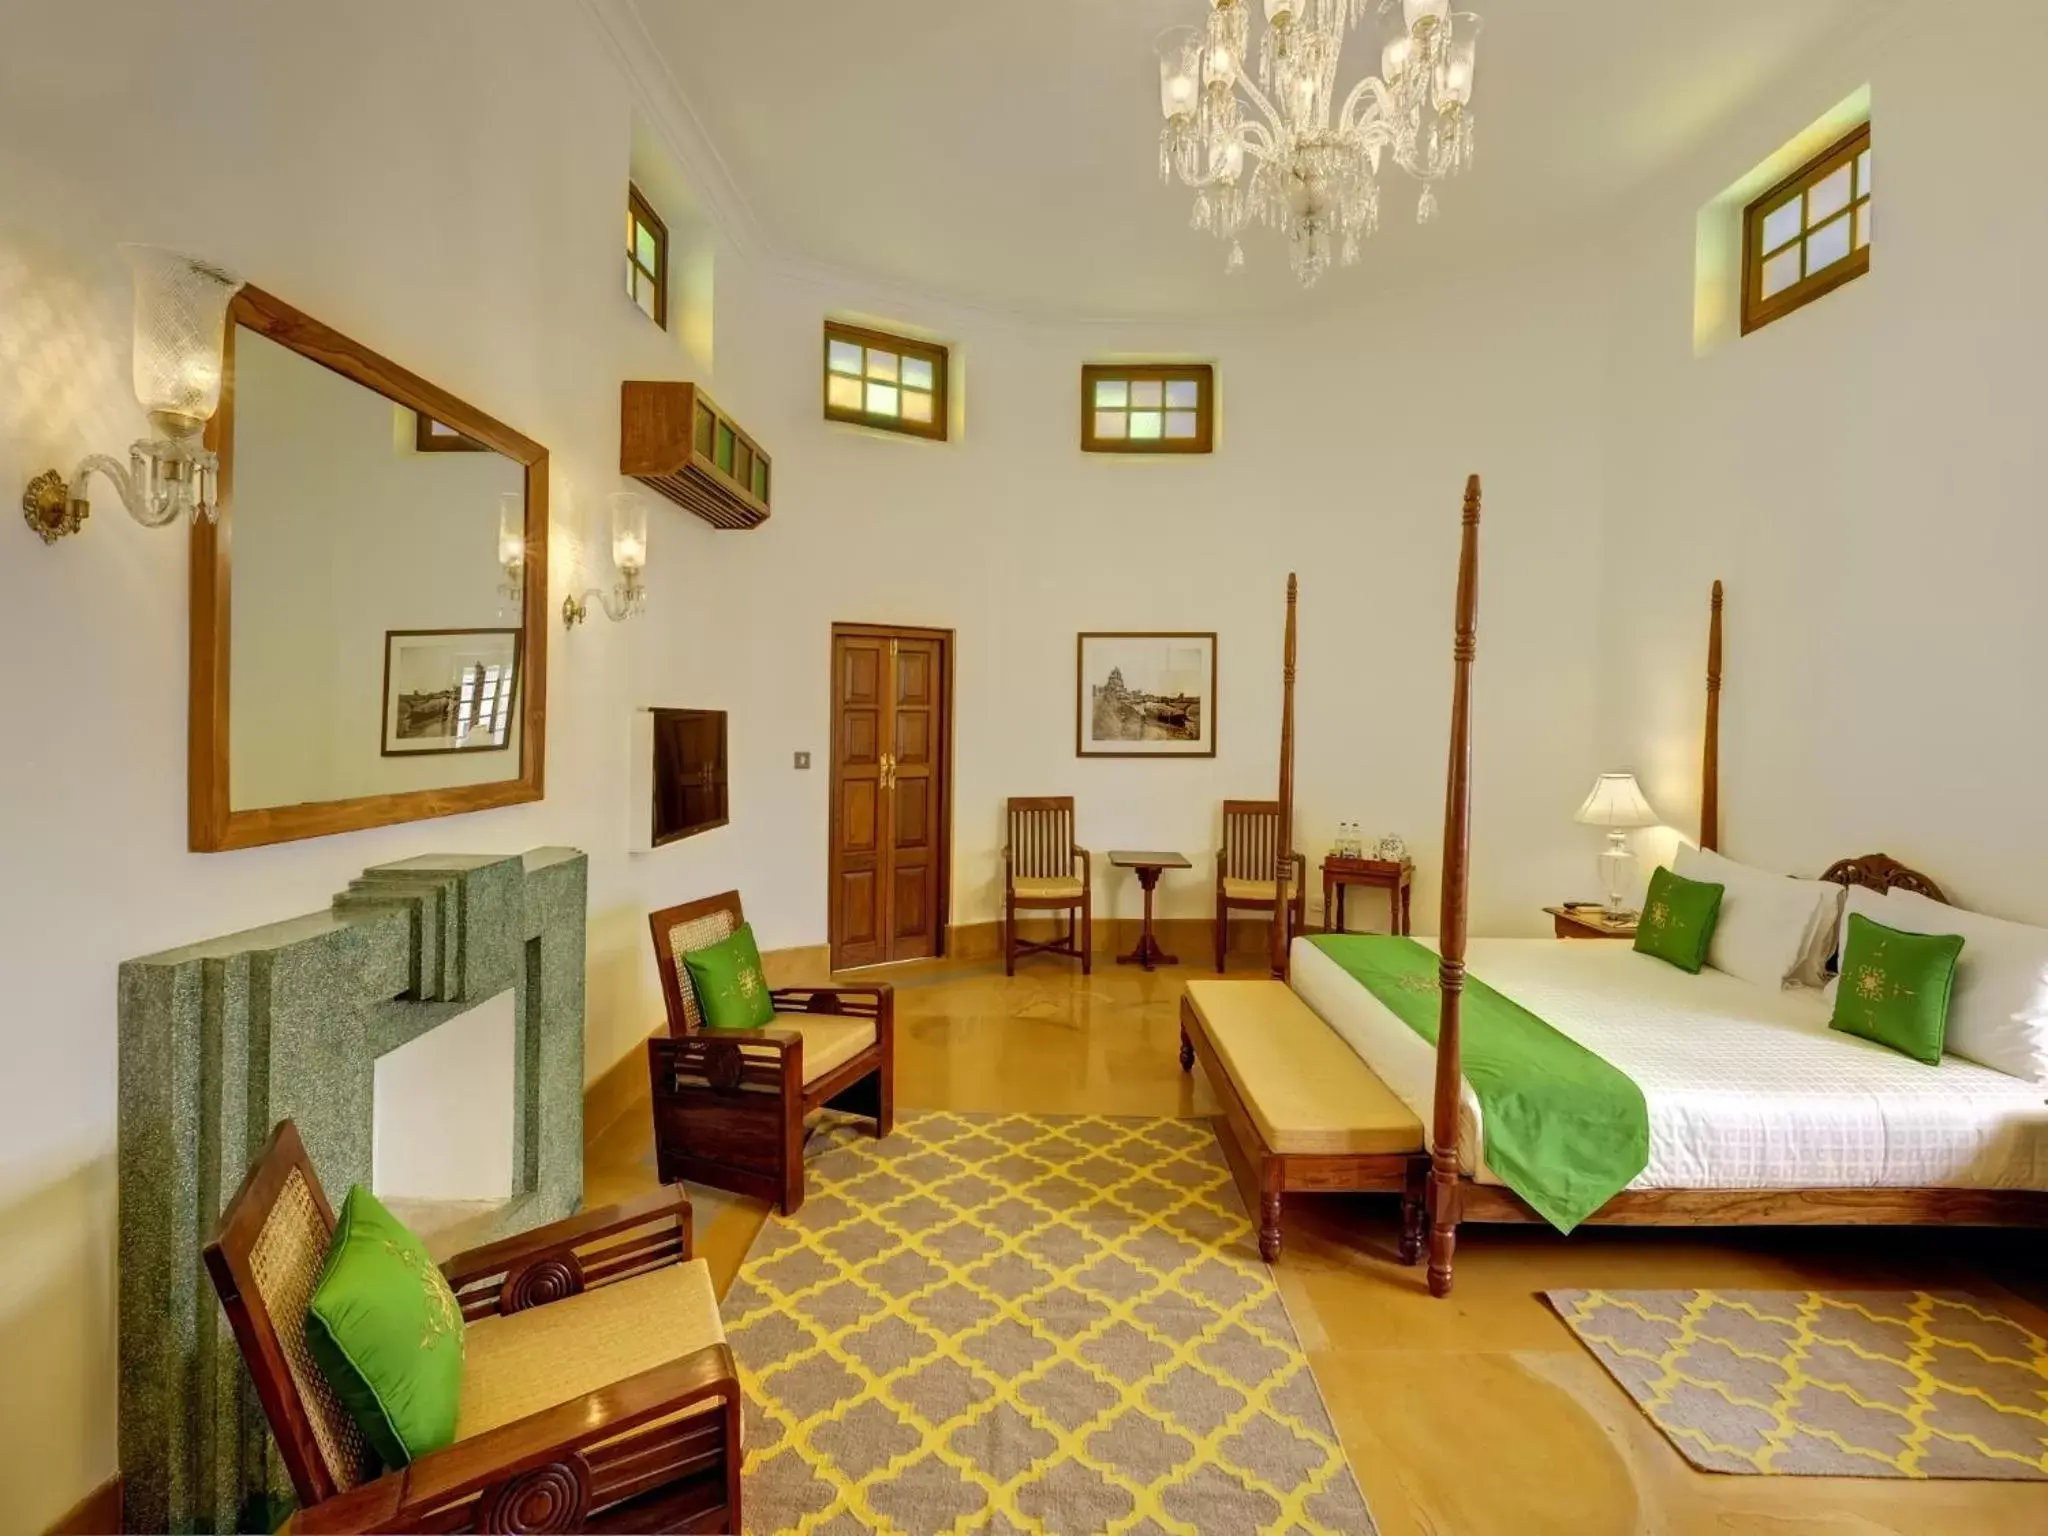 Bedroom in lebua Lucknow